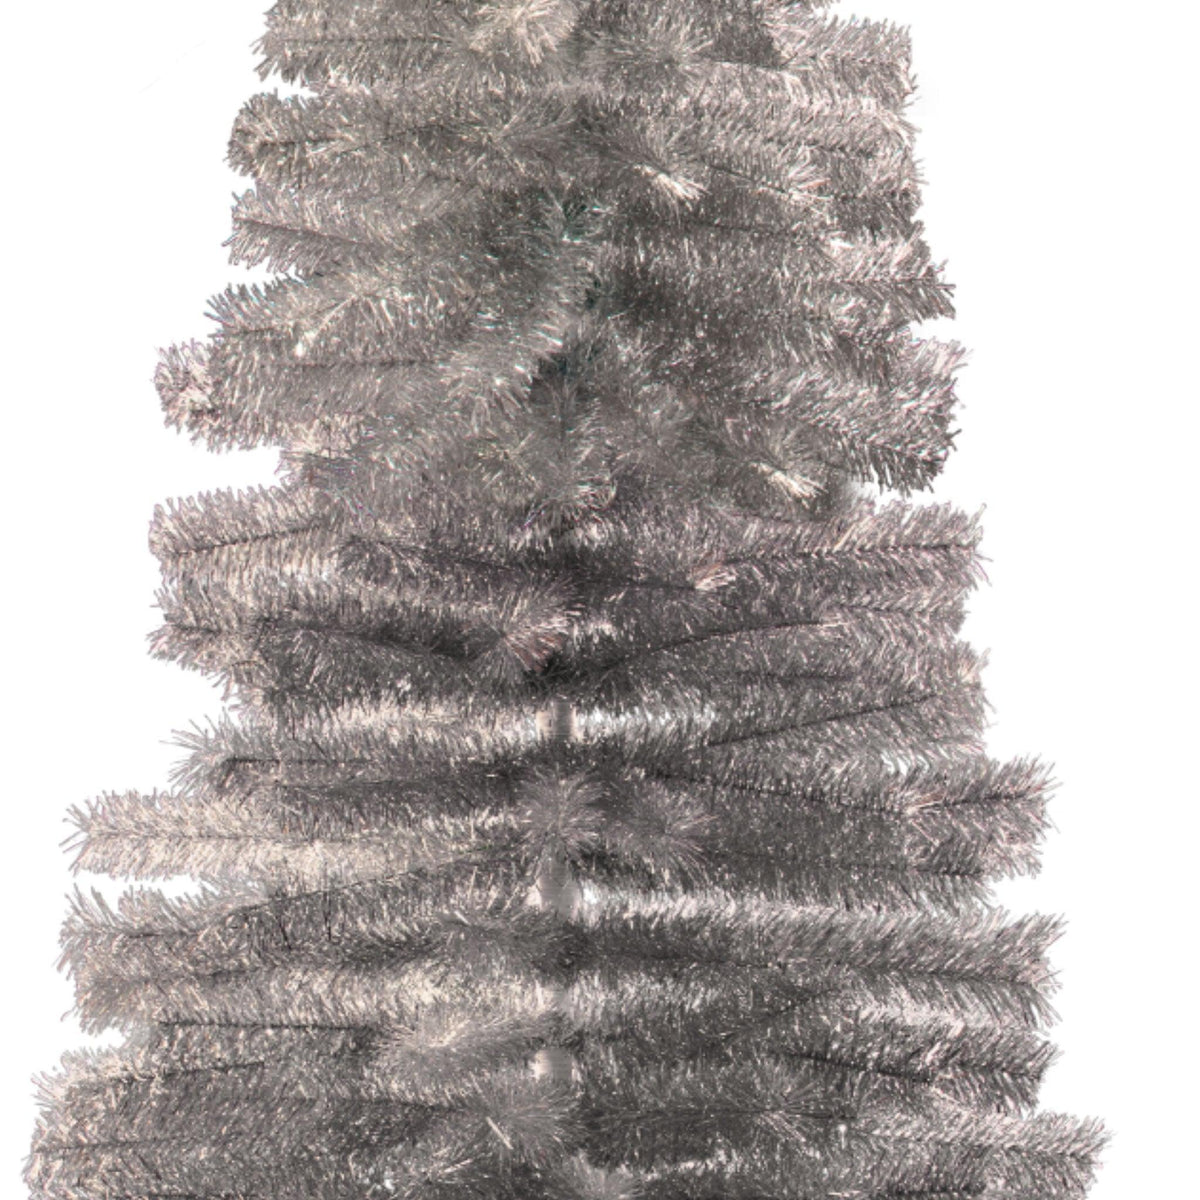 The Silver Tinsel Pencil Style Christmas Tree comes with tons of branches and tinsel brush